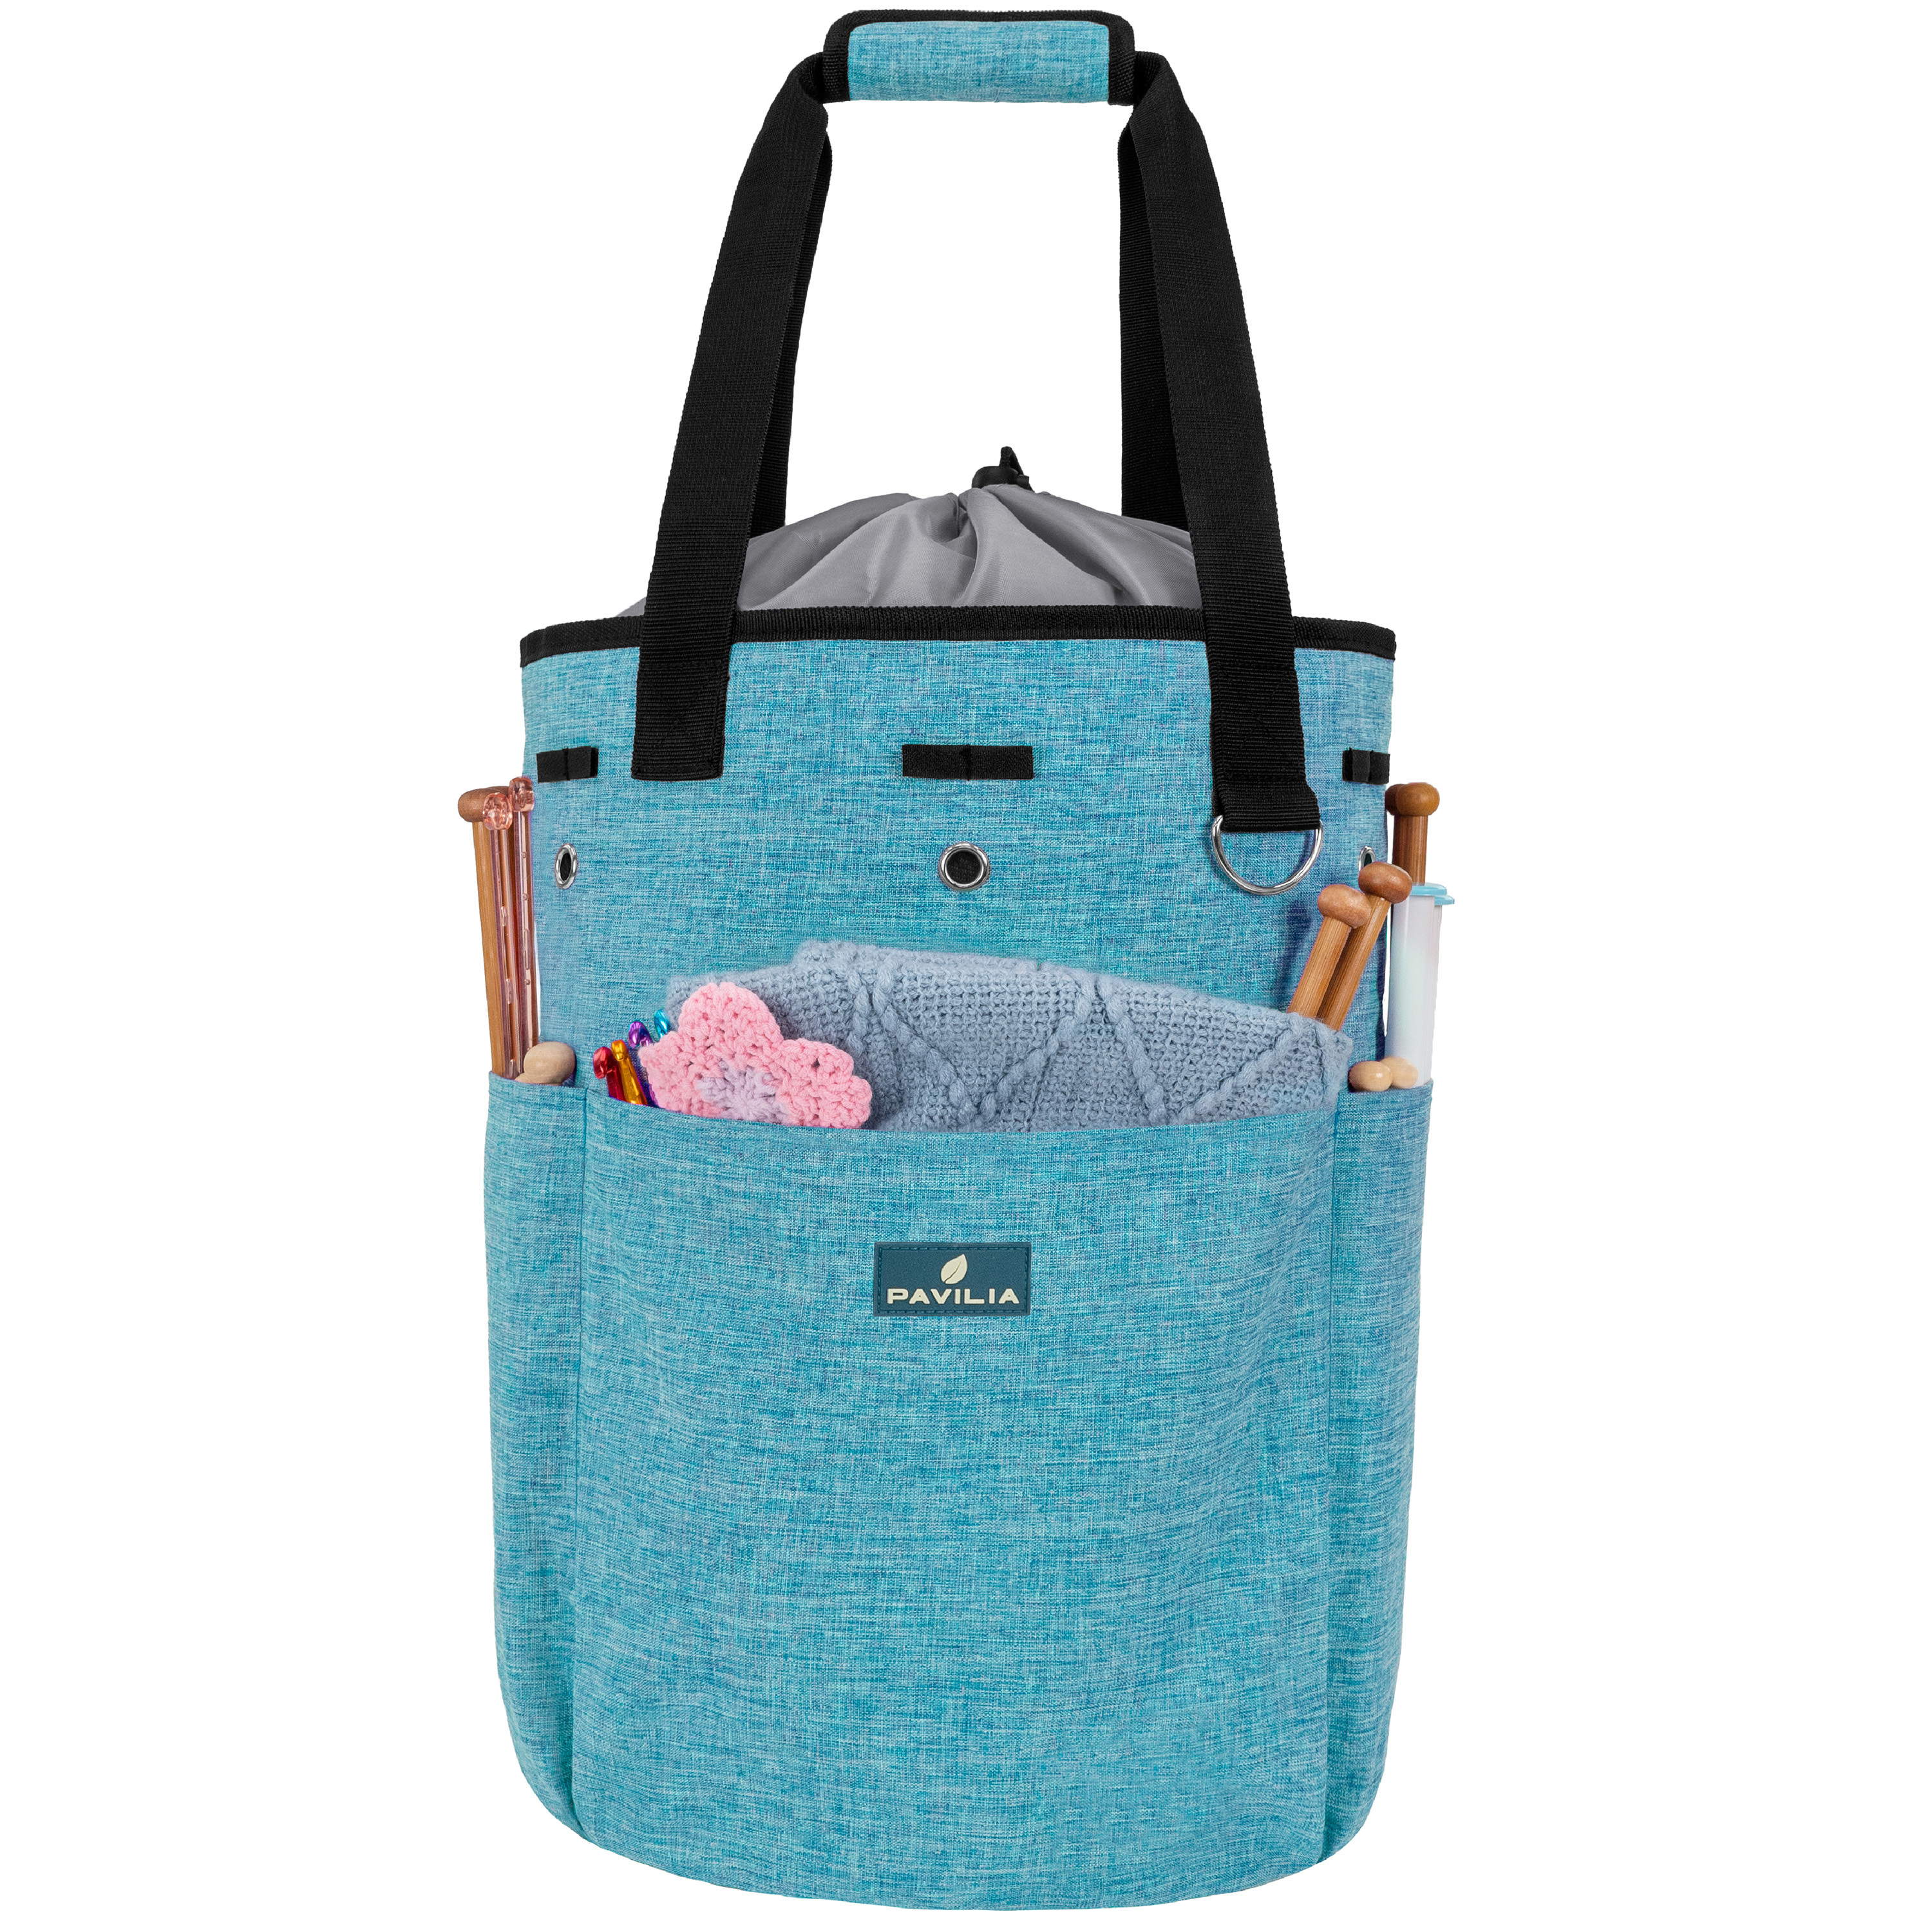 PAVILIA Knitting Bag Crochet Organizer Bag, Yarn Storage Tote, Knitting  Accessories Supplies, Yarn Holder For Knitting With Grommets, Needles Hooks  Essentials, Crochet Project Case (Turquoise Blue) 